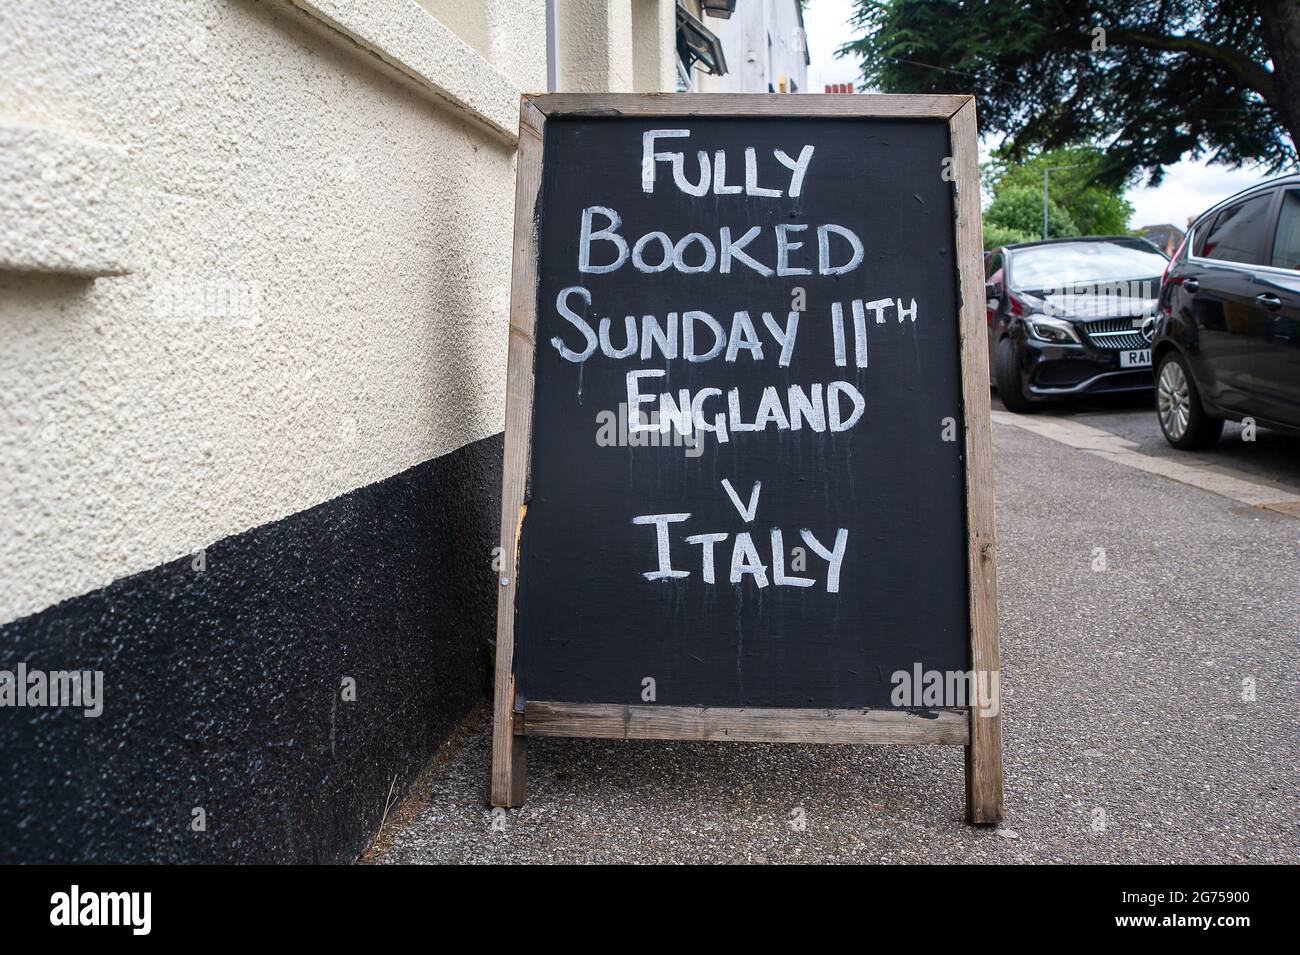 Windsor, Berkshire, UK. 11th July, 2021. A fully booked sign outside a pub in Windsor today ahead of the UEFA Euro 2020 final tonight between England v Italy. Credit: Maureen McLean/Alamy Live News Stock Photo